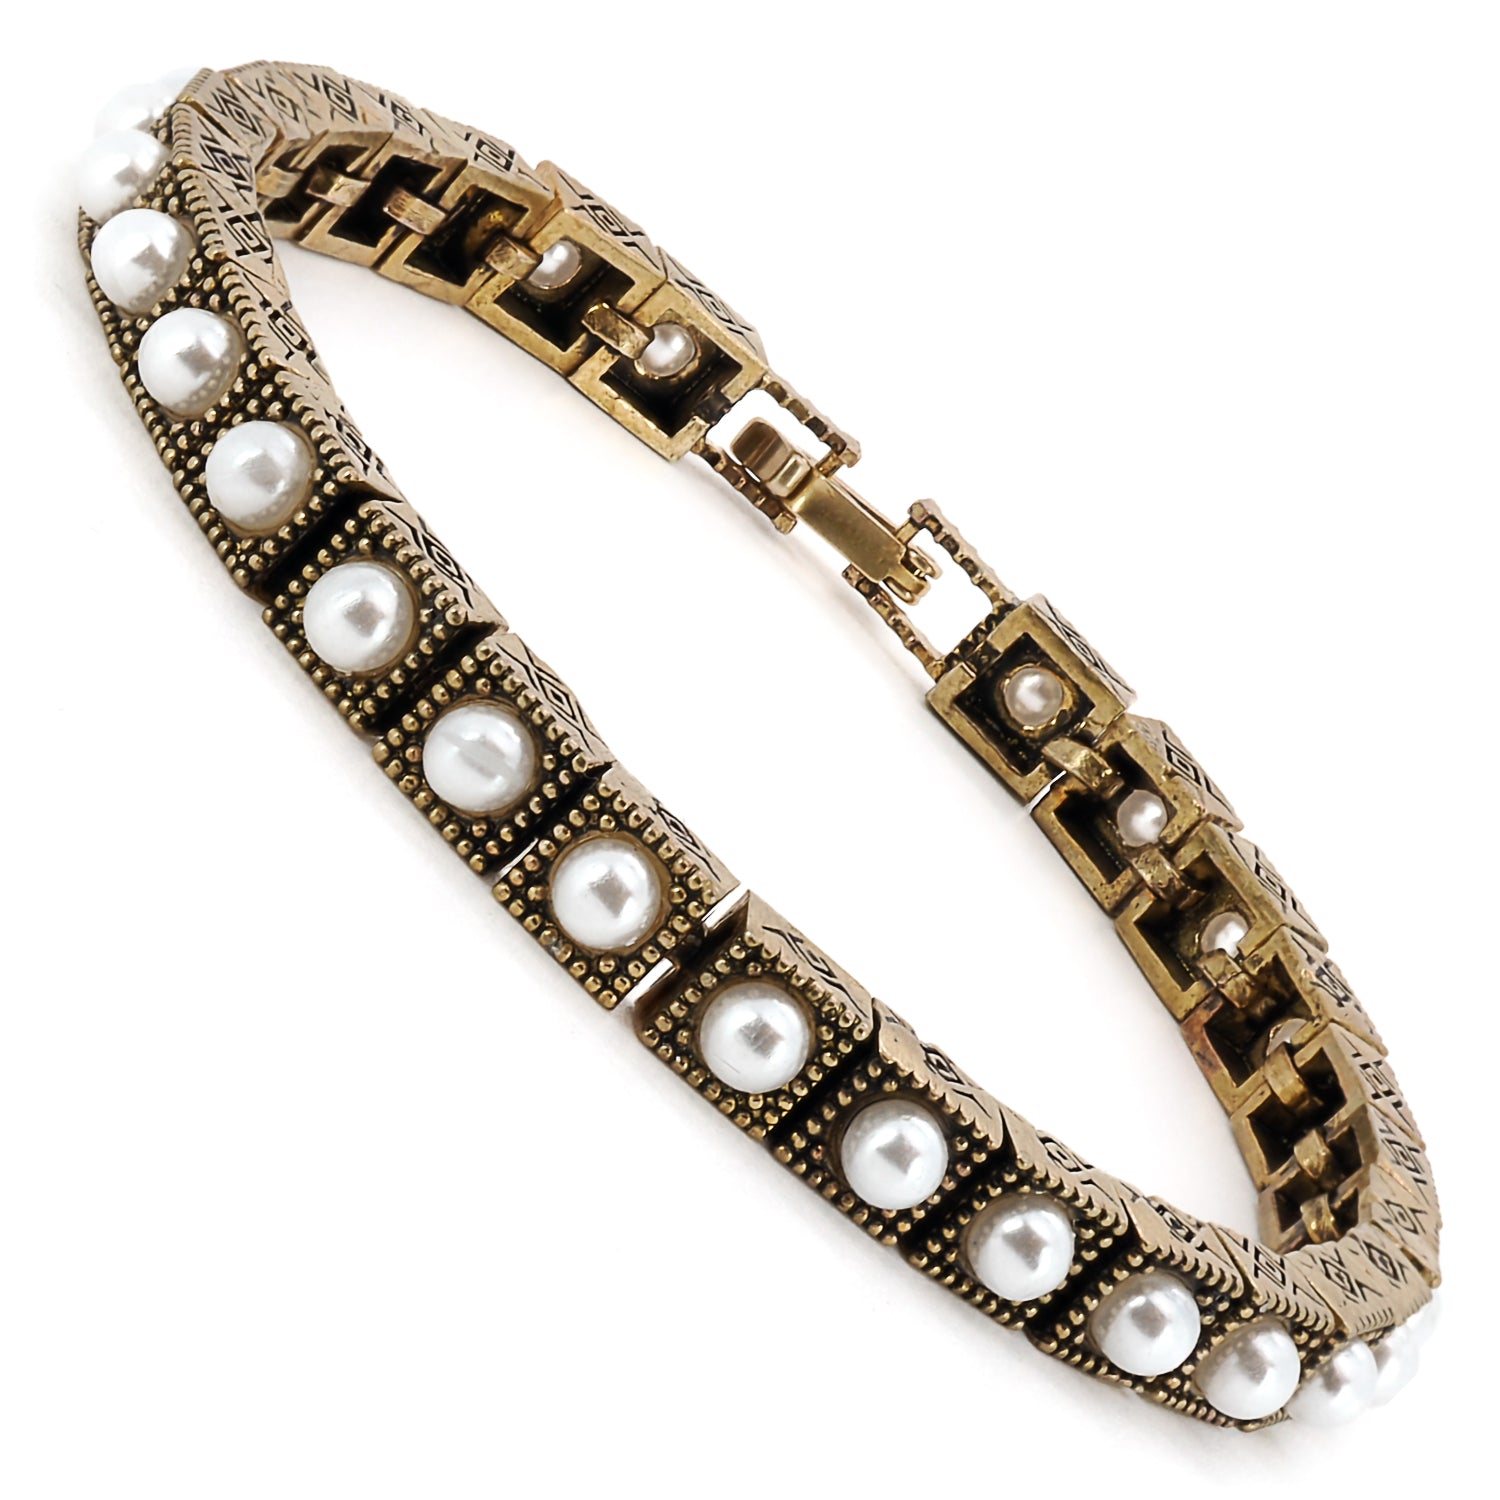 A stunning bronze and pearl bracelet, showcasing its timeless beauty.